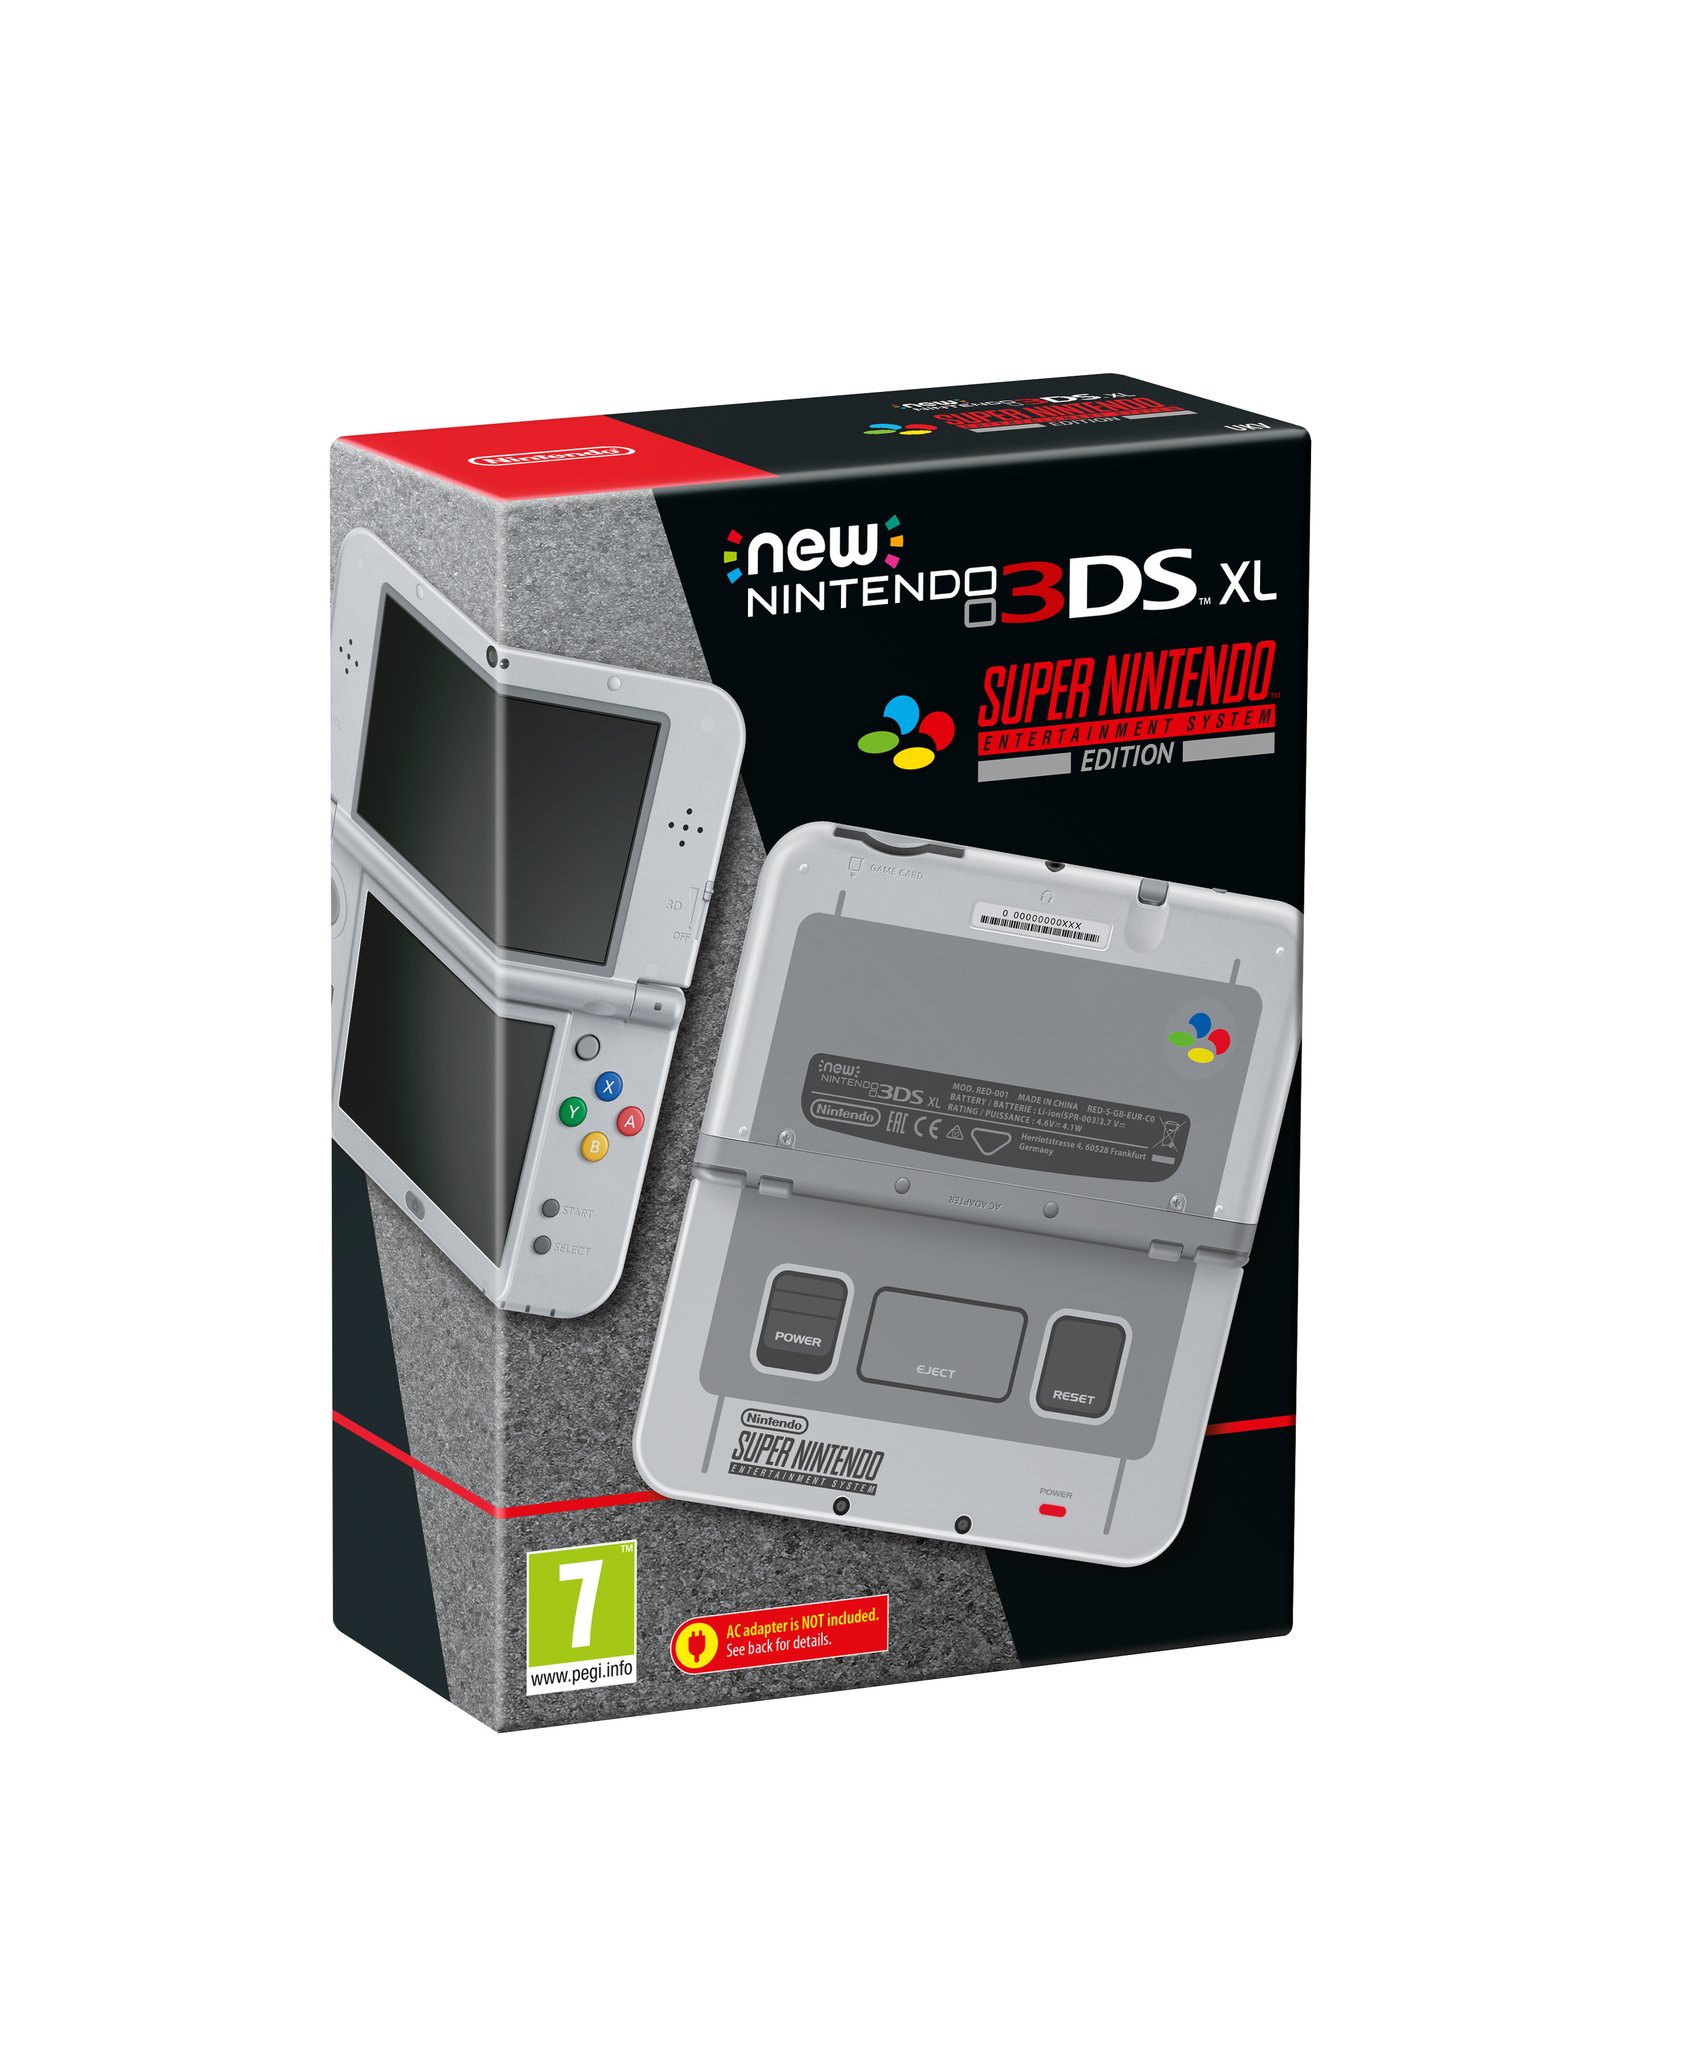 Media asset in full size related to 3dfxzone.it news item entitled as follows: Nintendo annuncia la console 3DS XL Super Nintendo Entertainment System Edition | Image Name: news26901_3DS-XL-Super-Nintendo-Entertainment-System-Edition_1.jpg